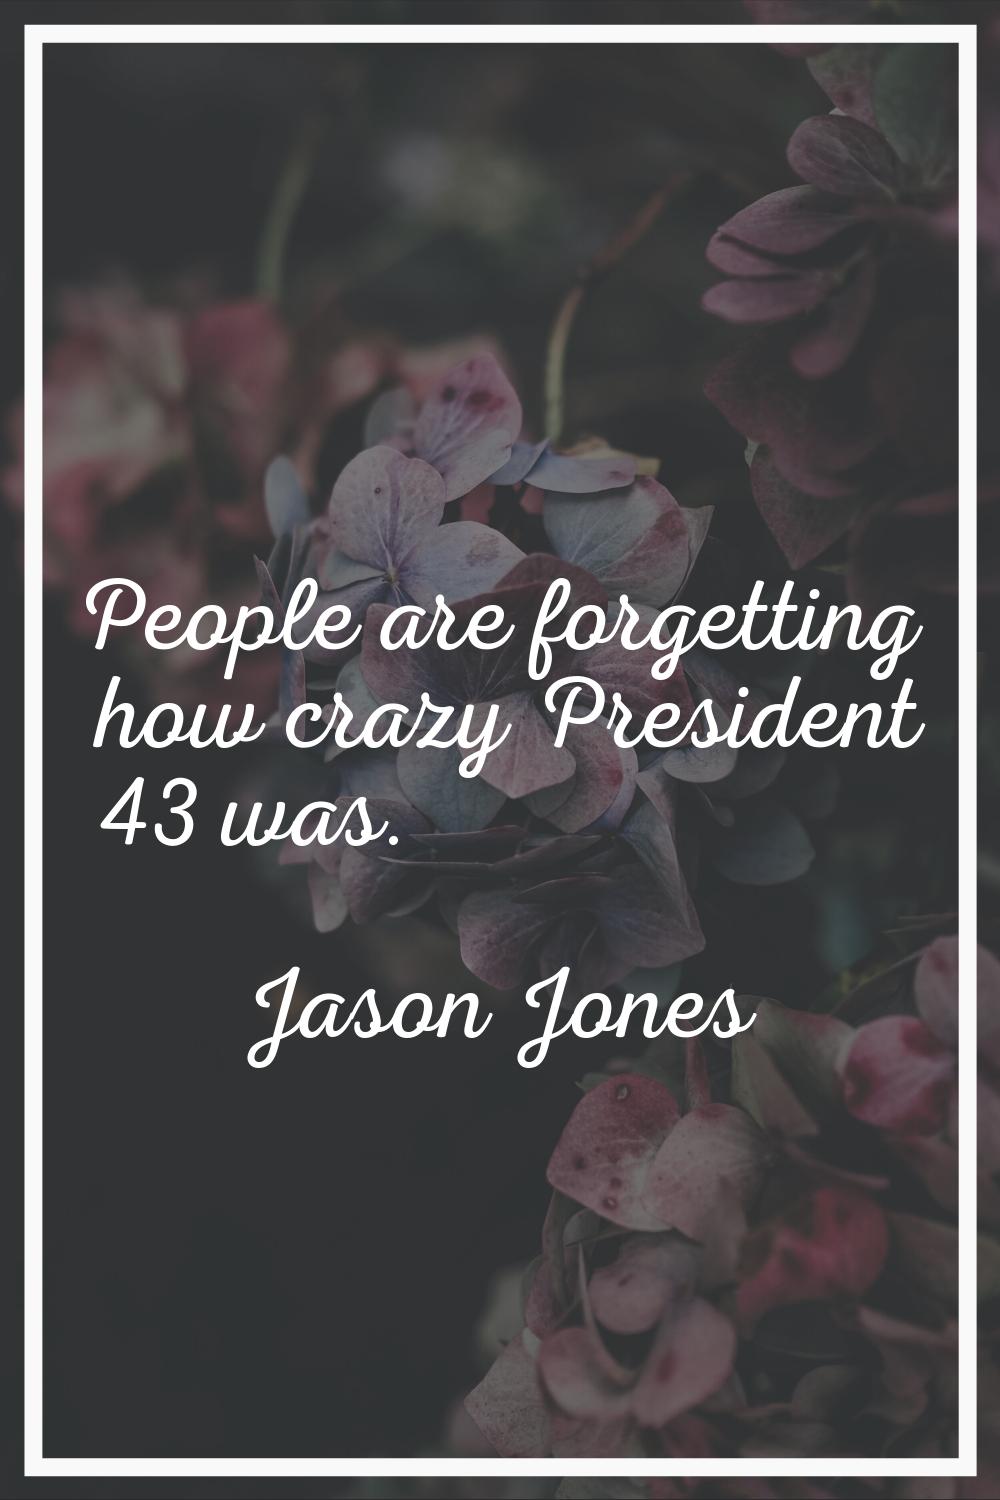 People are forgetting how crazy President 43 was.